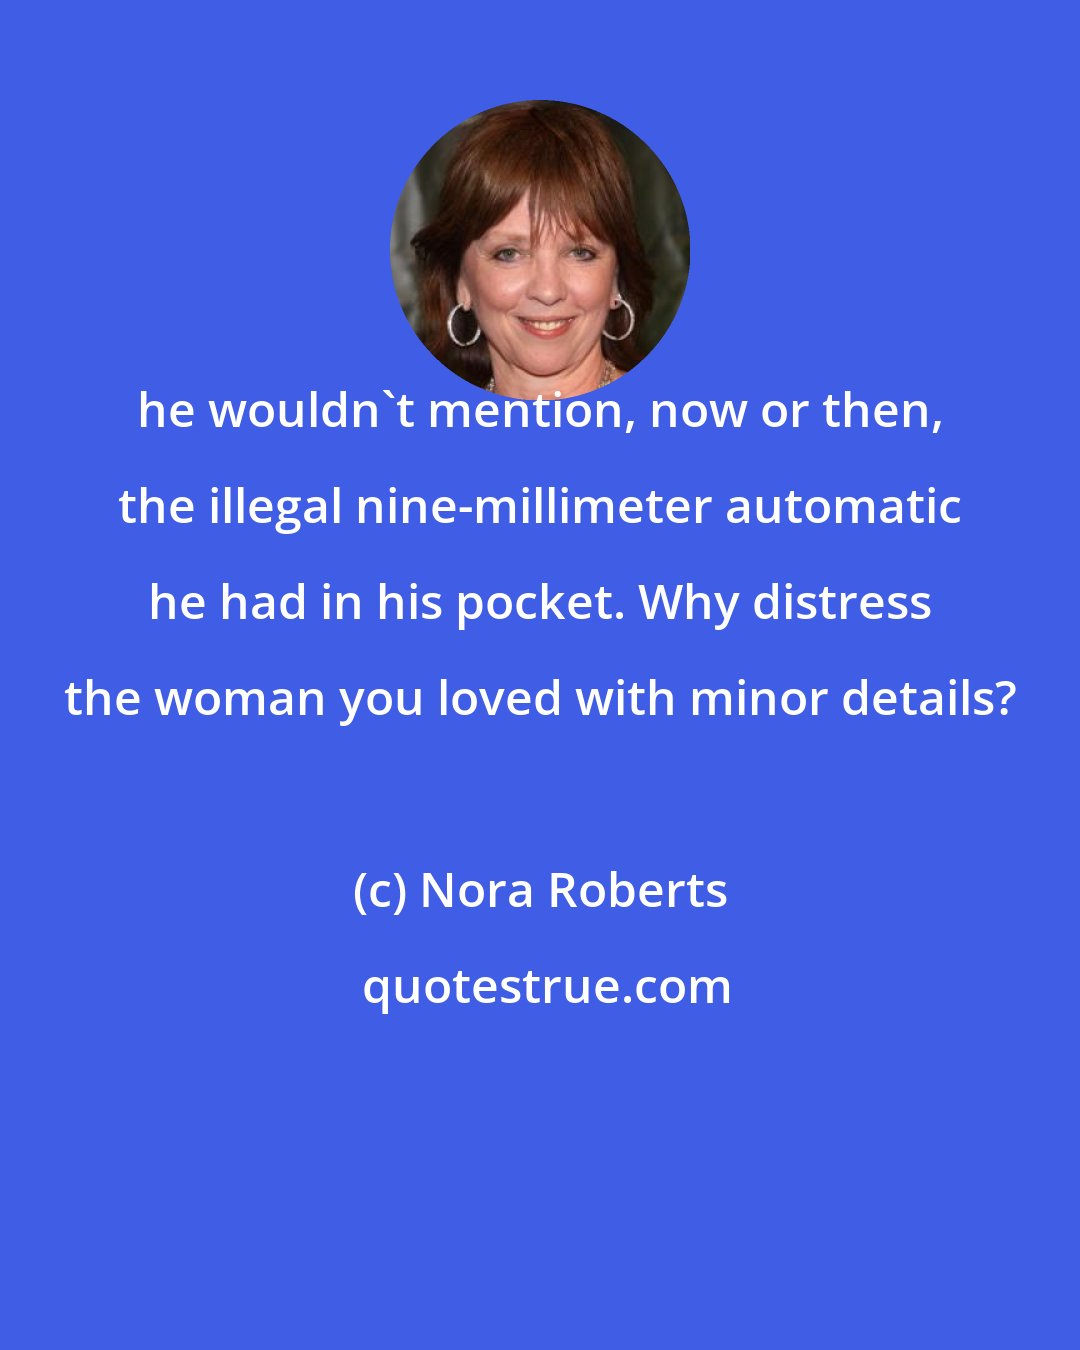 Nora Roberts: he wouldn't mention, now or then, the illegal nine-millimeter automatic he had in his pocket. Why distress the woman you loved with minor details?